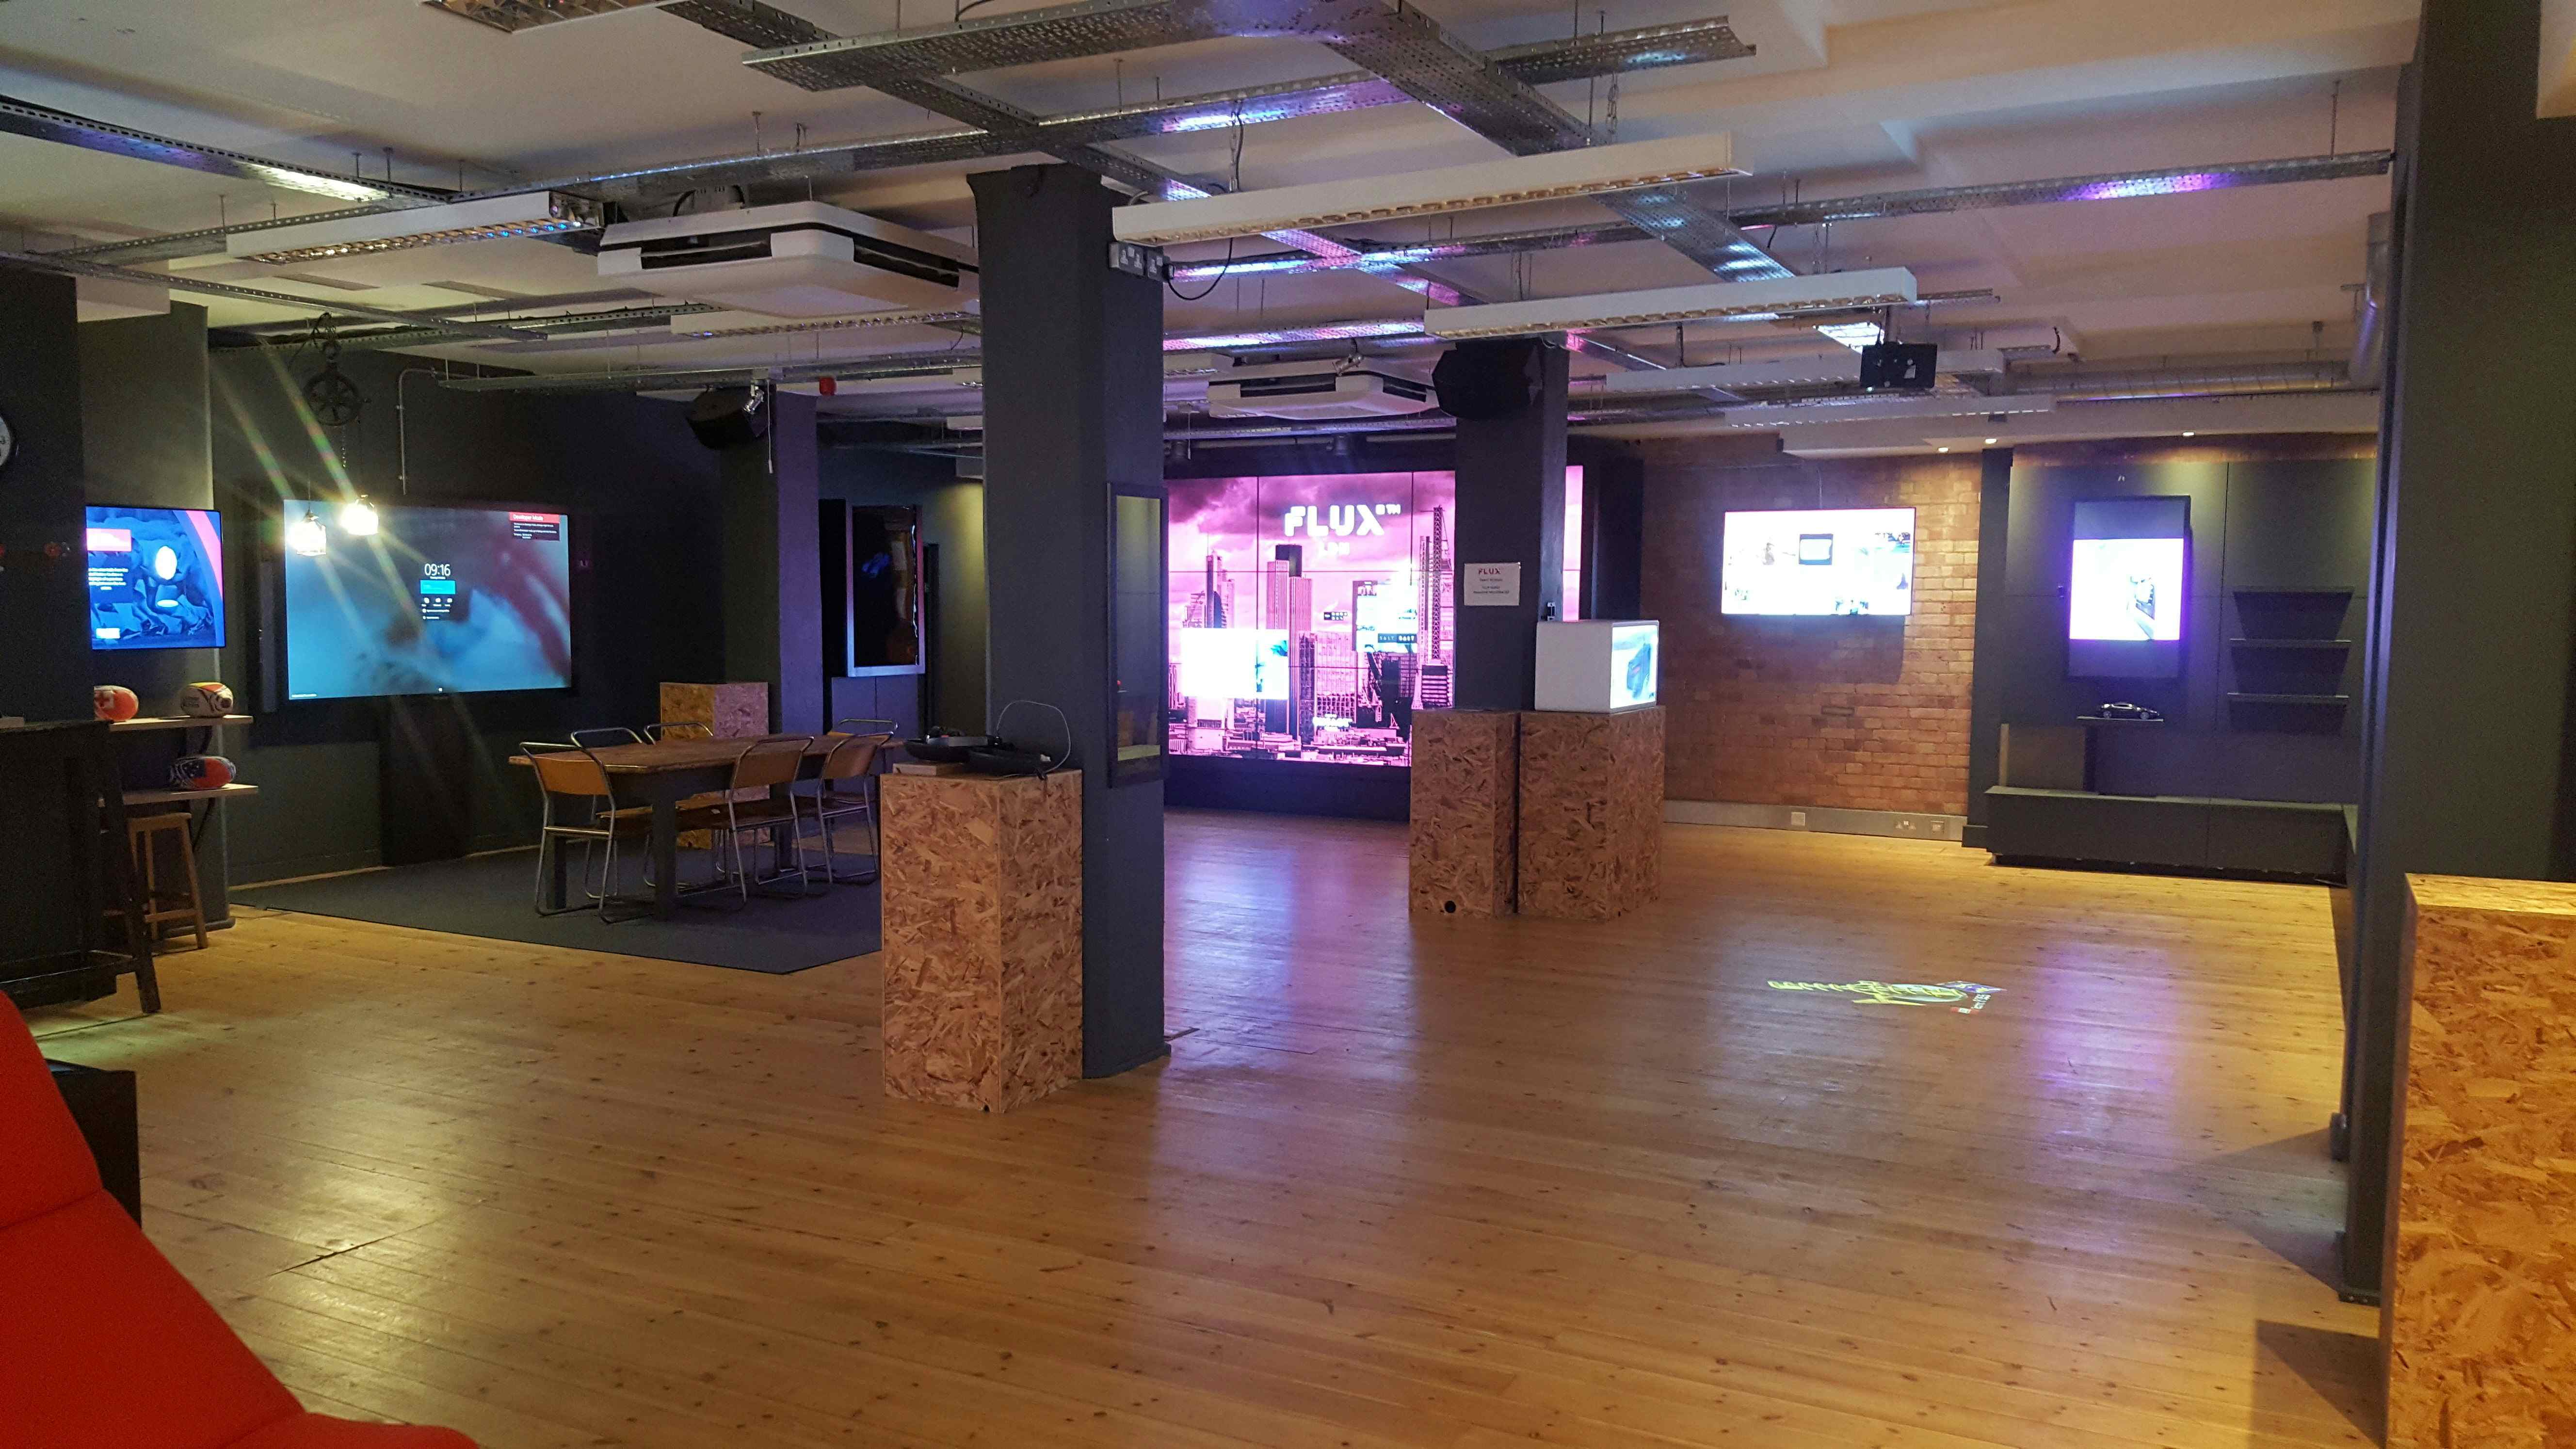 The Flux Innovation Lounge, Wool House E1